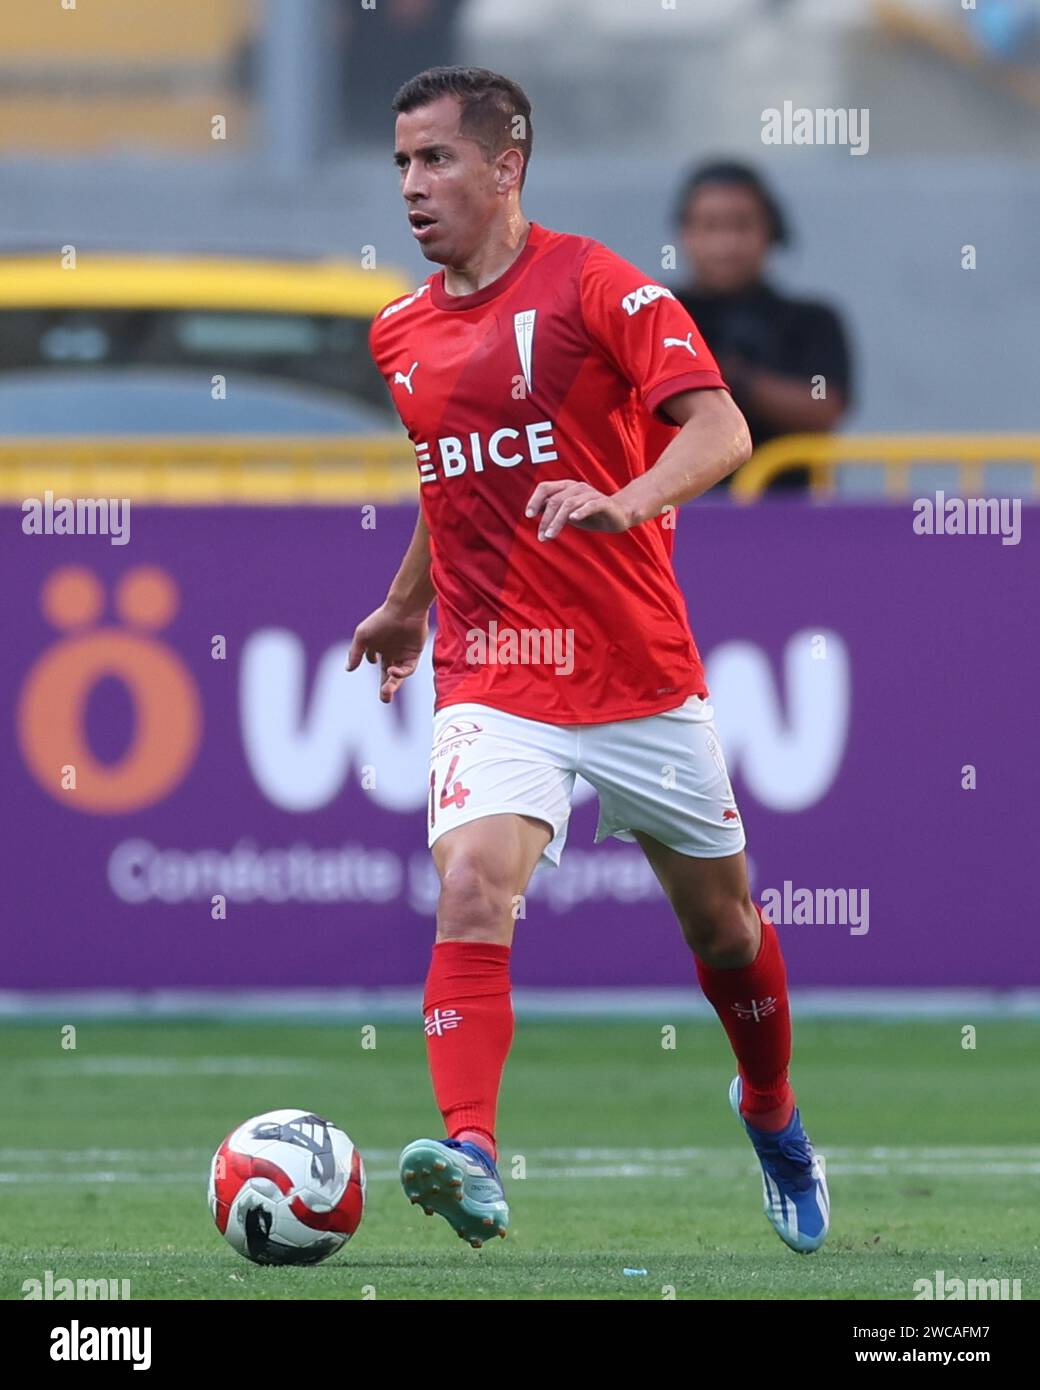 Lima, Peru. 14th Jan, 2024. Agustin Farias of Universidad Catolica during the friendly match between Sporting Cristal and Universidad Catolica de Chile played at Nacional Stadium on January 14, 2024 in Lima, Peru. (Photo by Miguel Marrufo/PRESSINPHOTO) Credit: PRESSINPHOTO SPORTS AGENCY/Alamy Live News Stock Photo